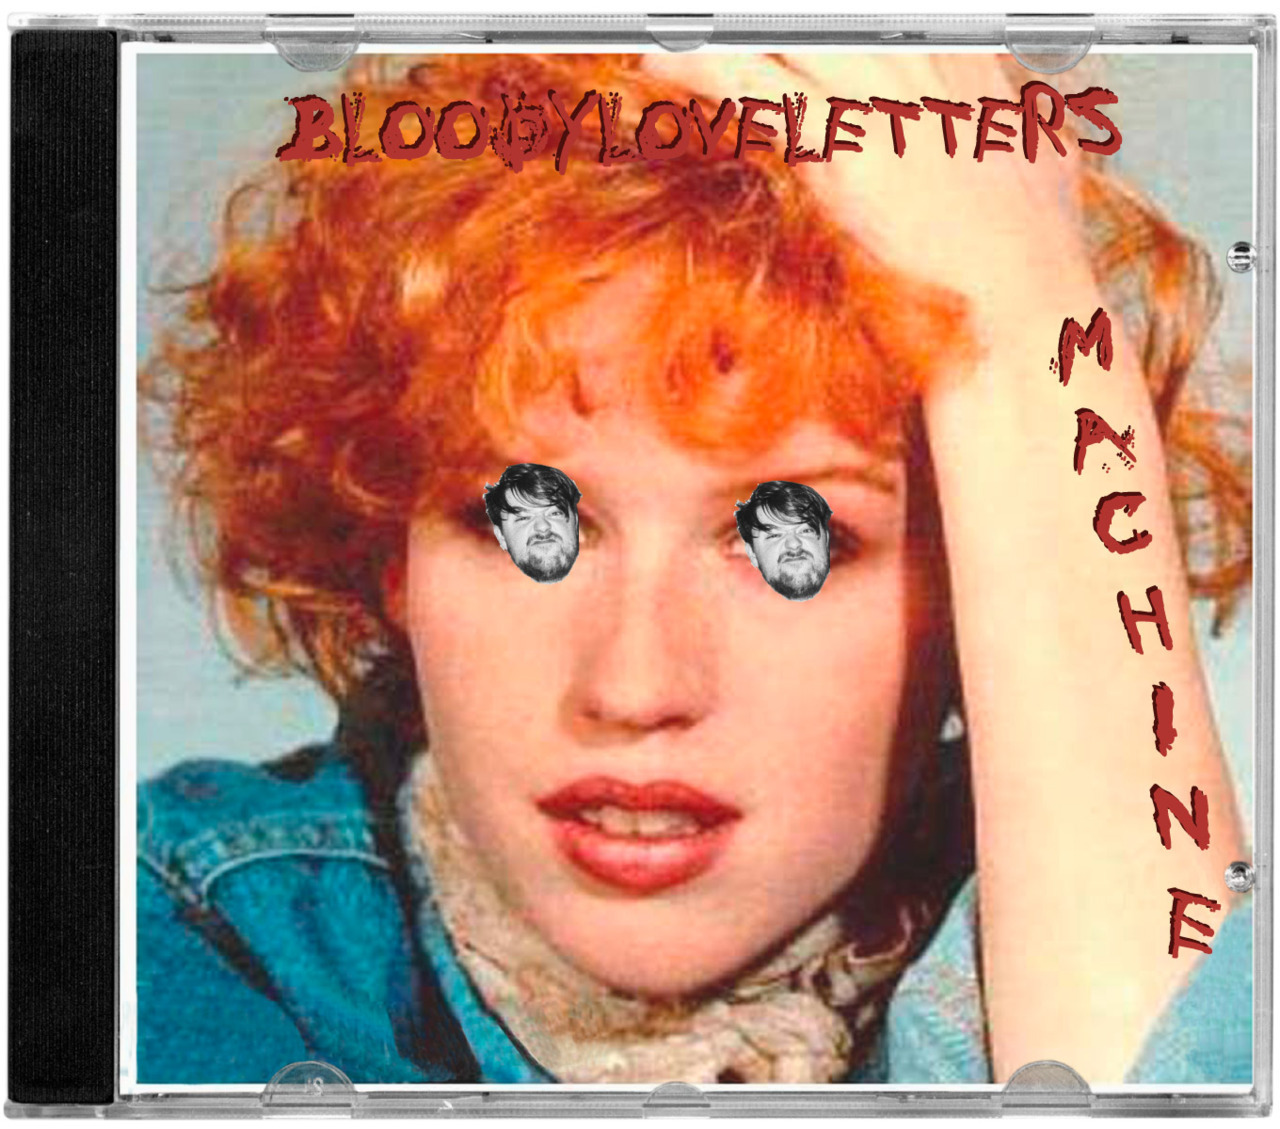 MACHINE FROM TEAM FACELIFT PRESENTS BLOODYLOVELETTERS  7 death threats/love letters